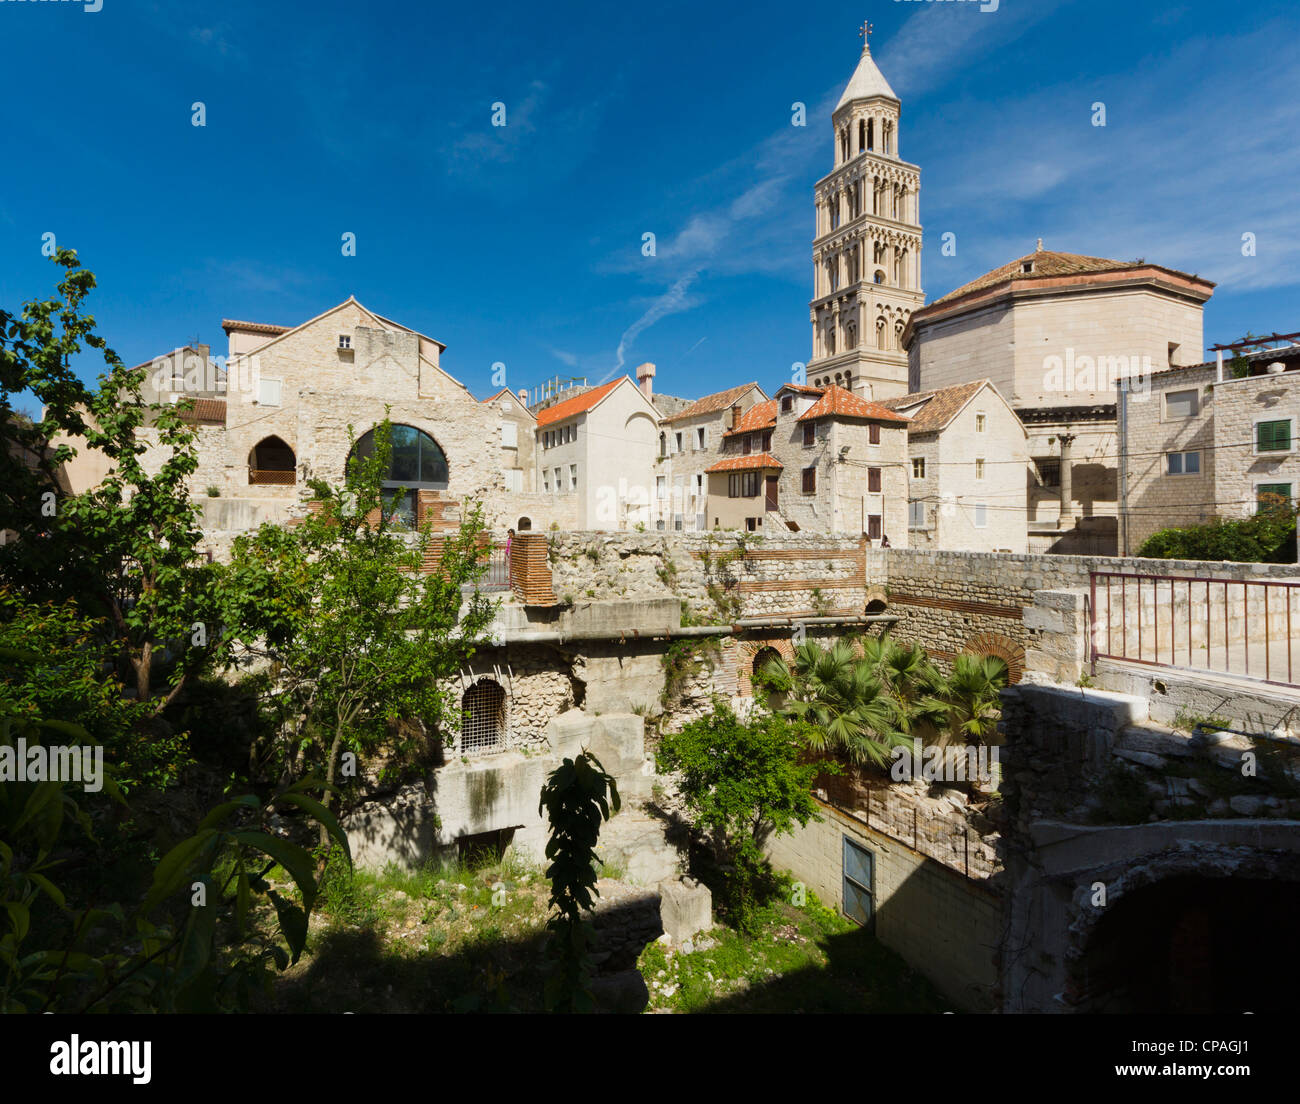 Split, Dalmatian coast of Croatia - ruins of Roman Emperor Diocletian's Palace, old walled heart of city. Cathedral campanile. Stock Photo